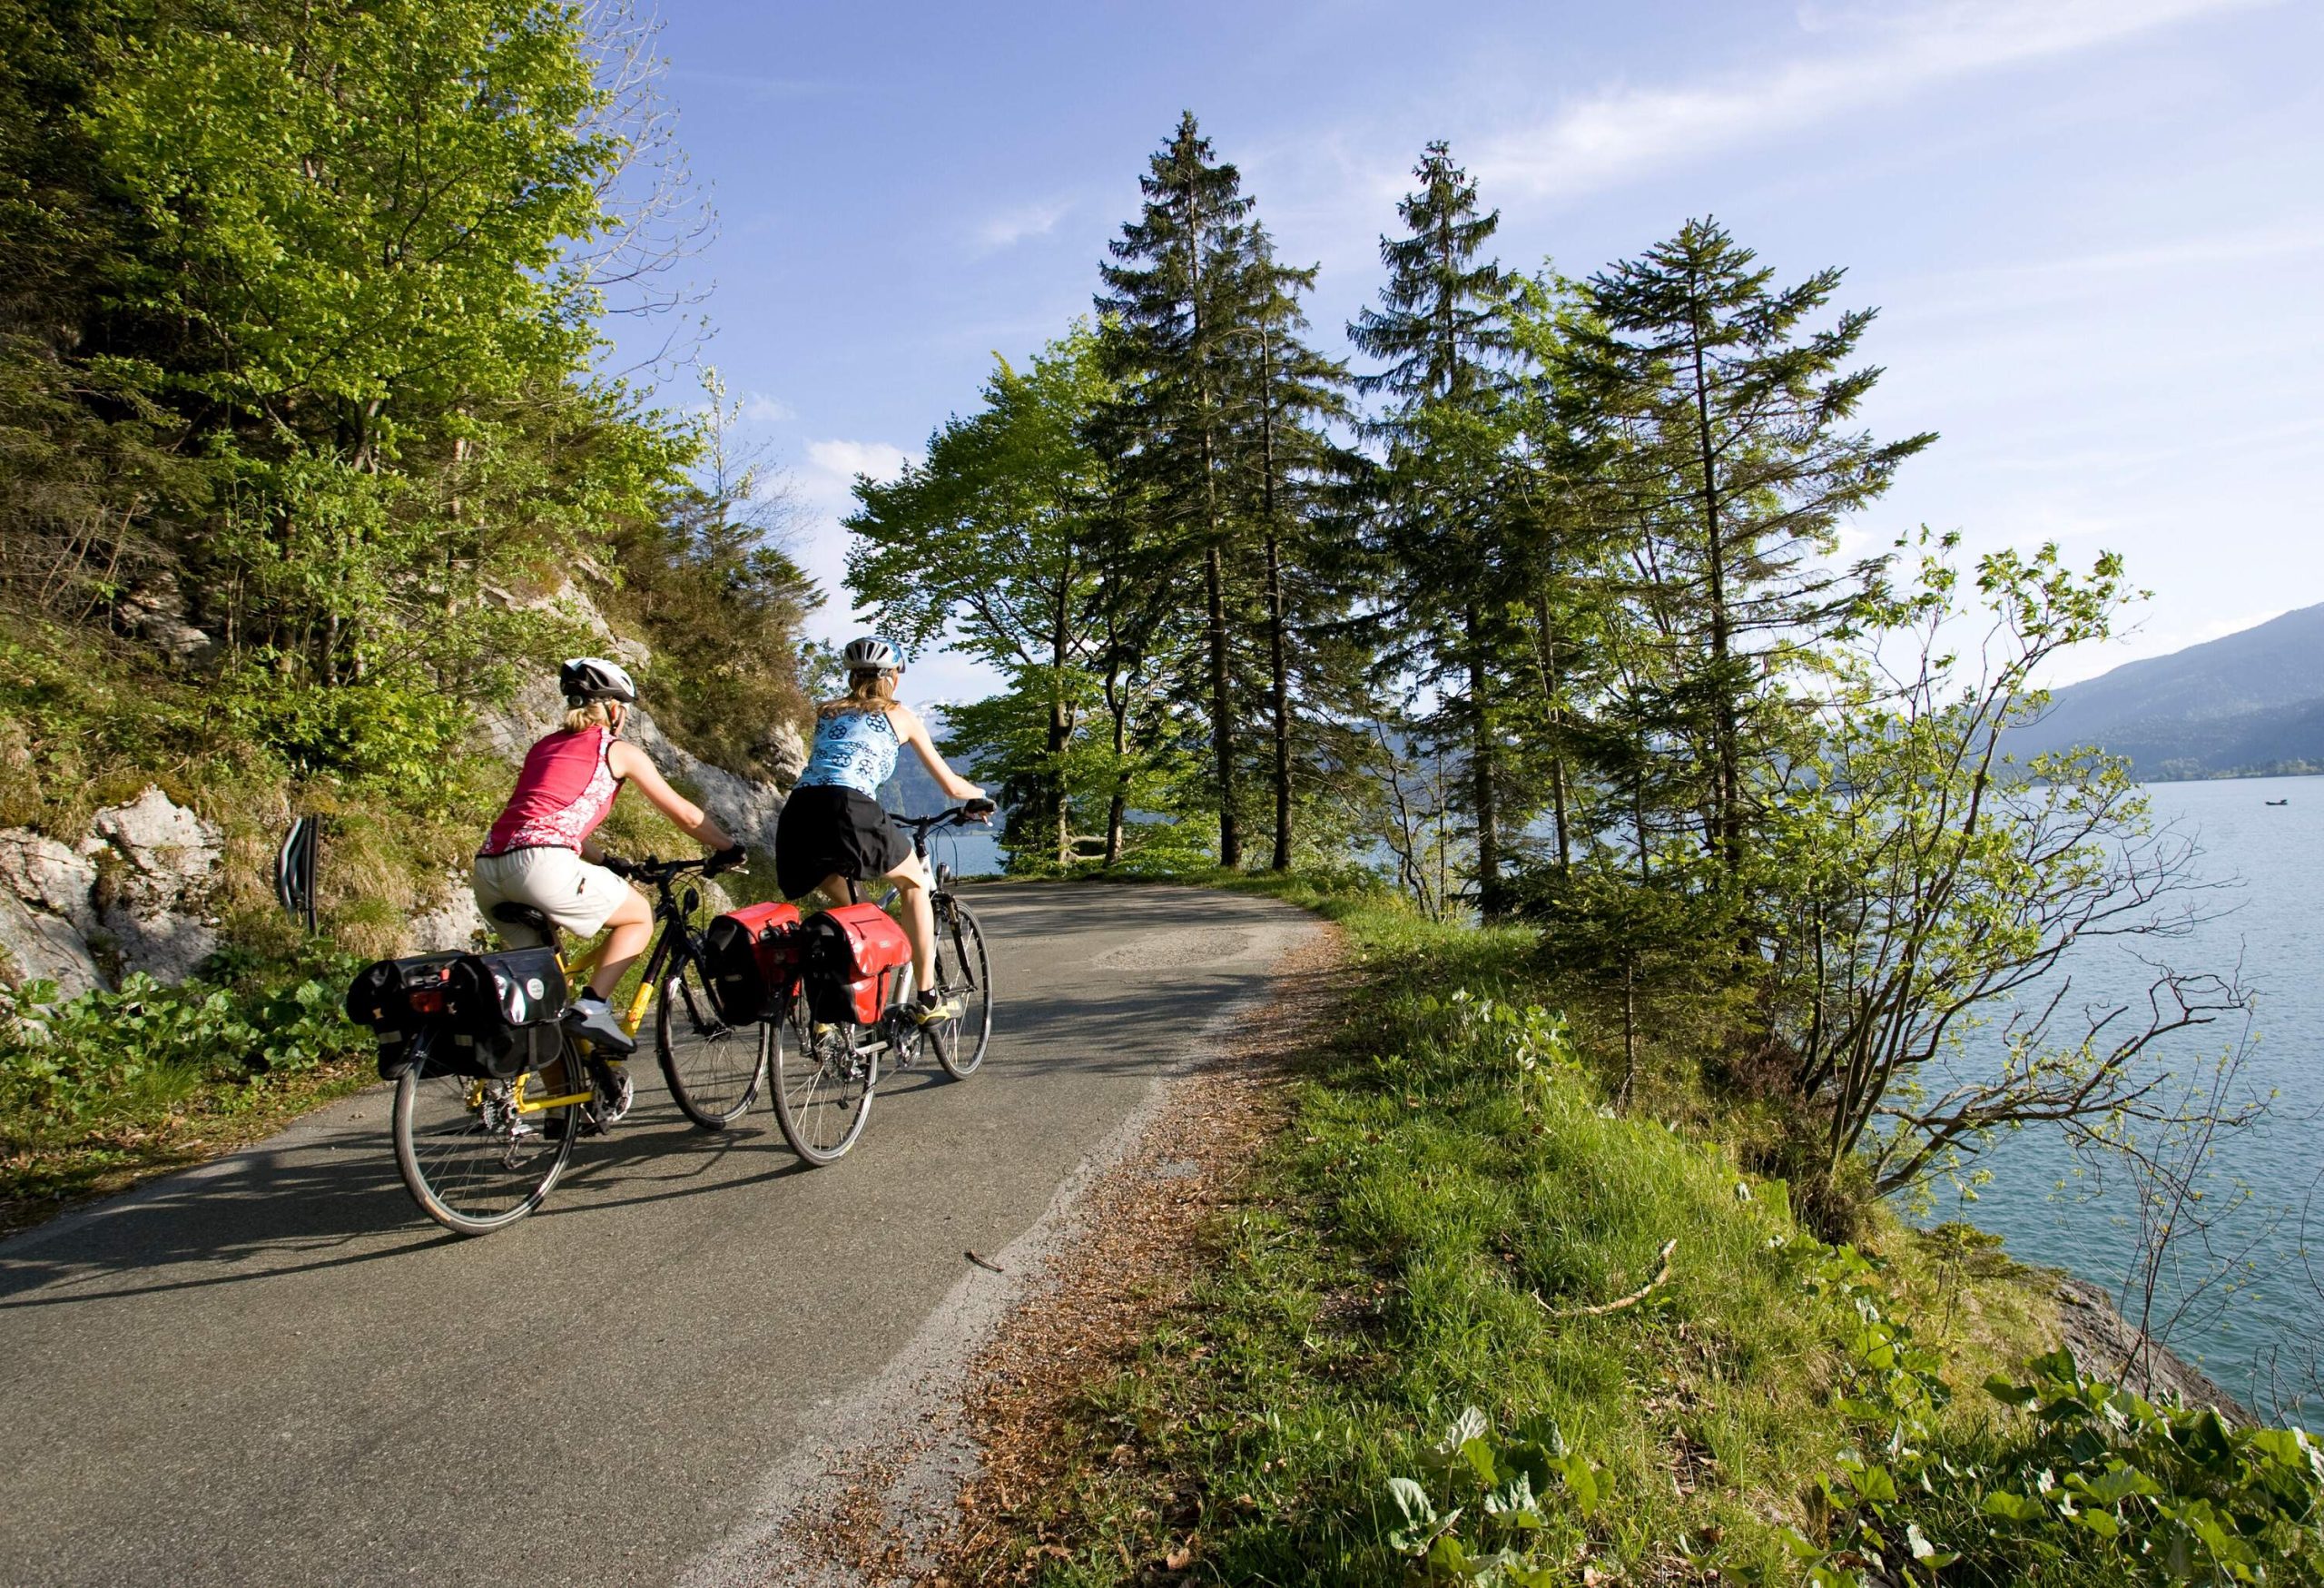 Two people riding their bikes on an uphill road in the mountains overlooking a lake.